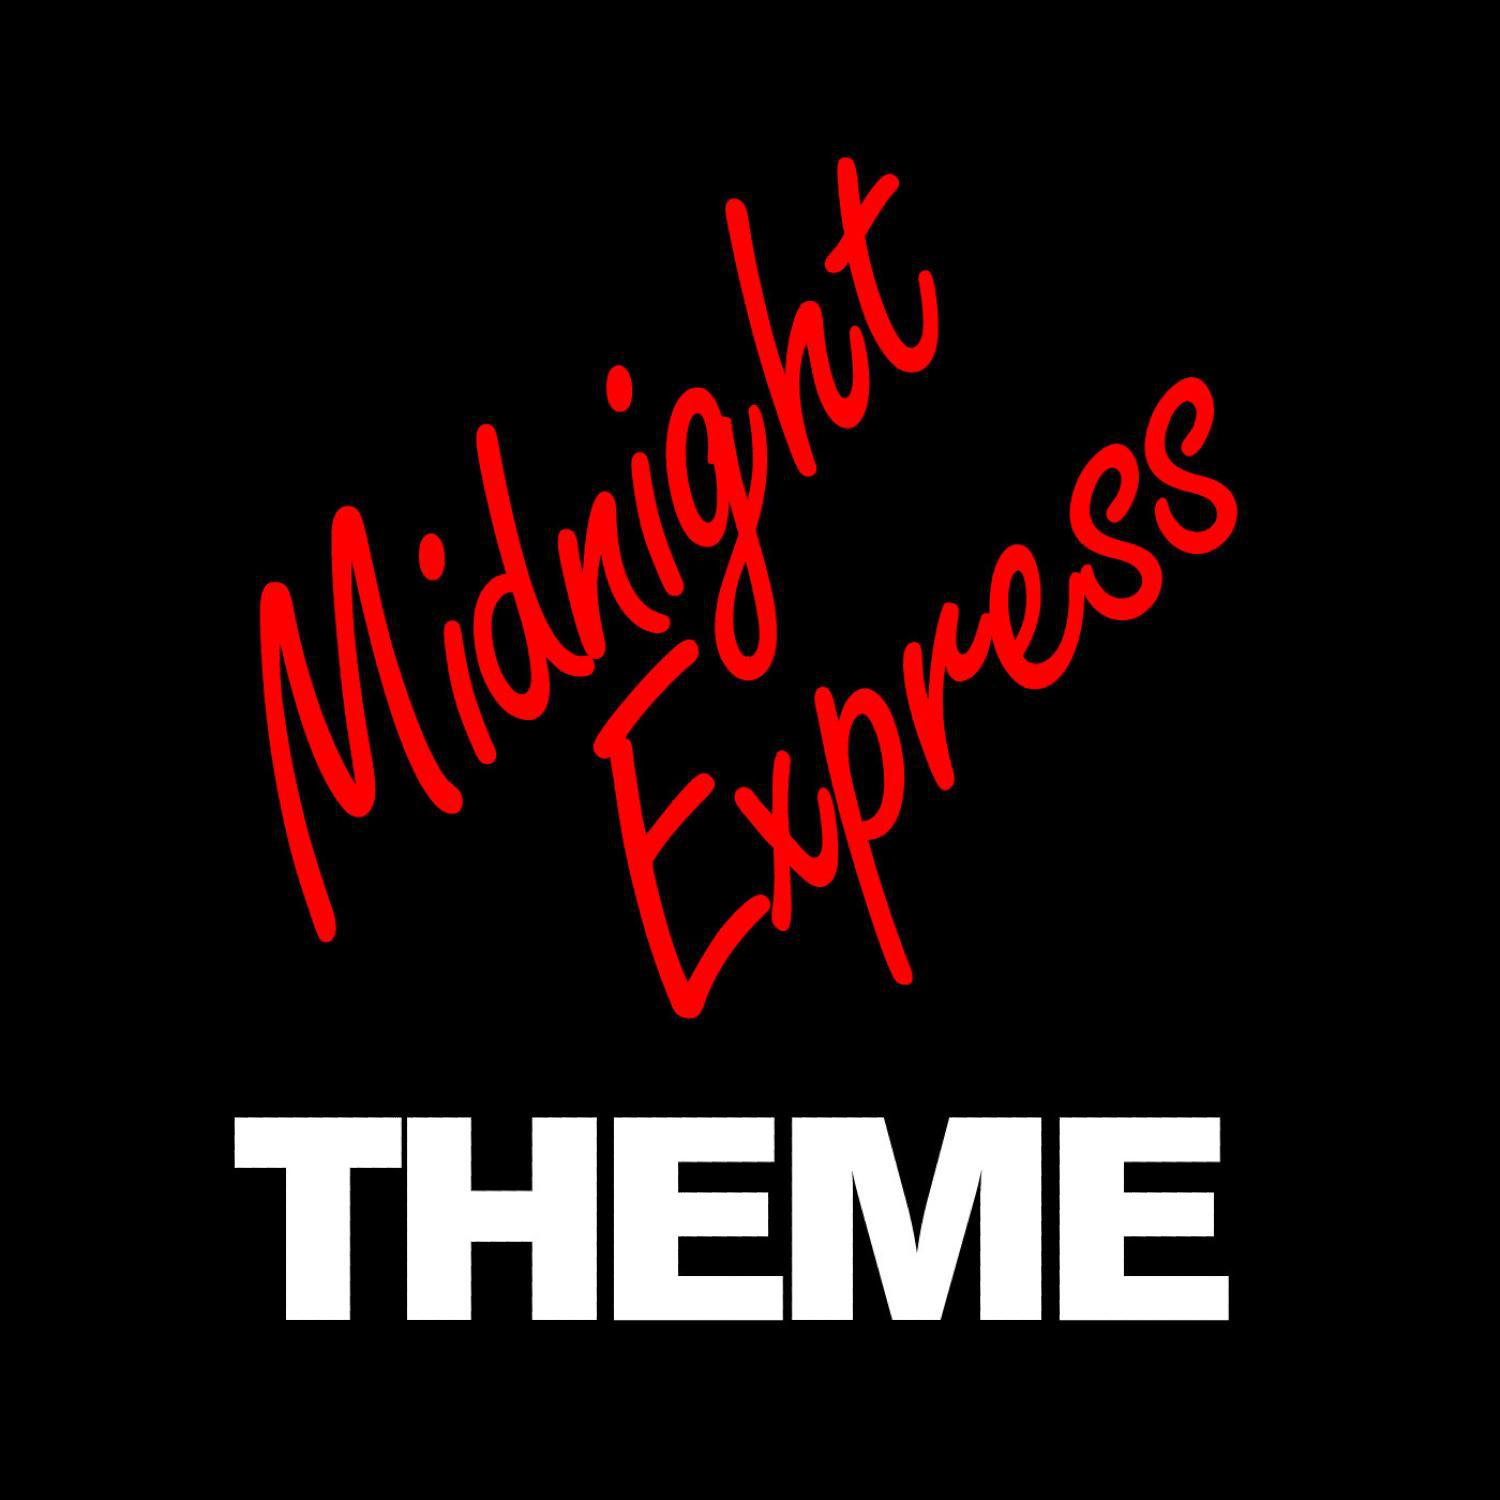 Midnight Express - The Chase专辑